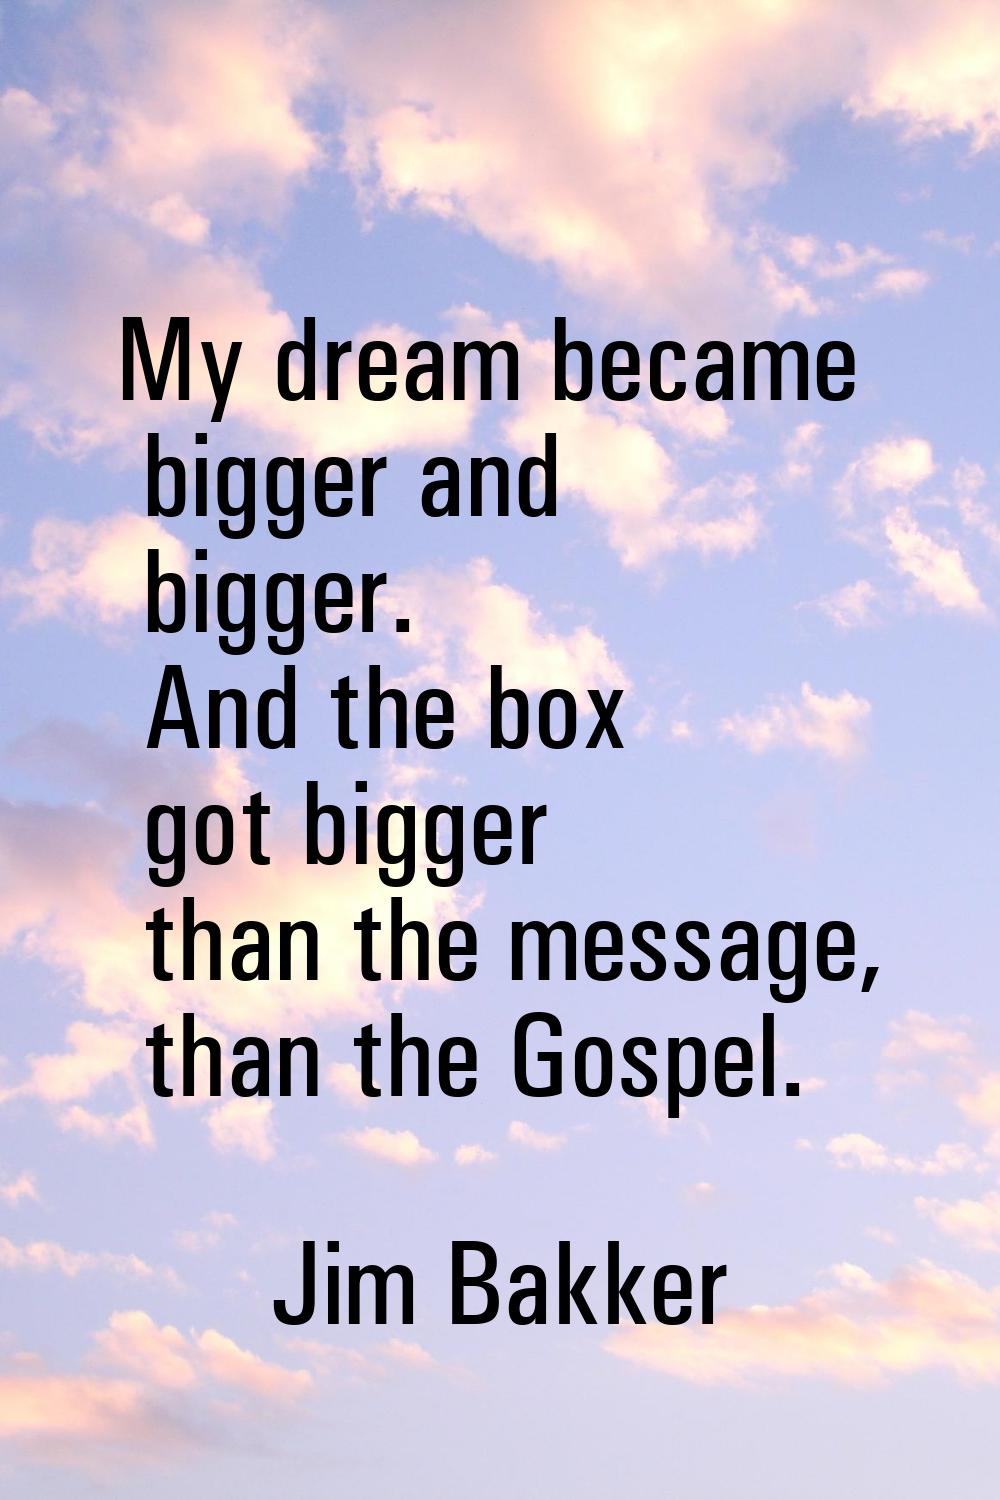 My dream became bigger and bigger. And the box got bigger than the message, than the Gospel.